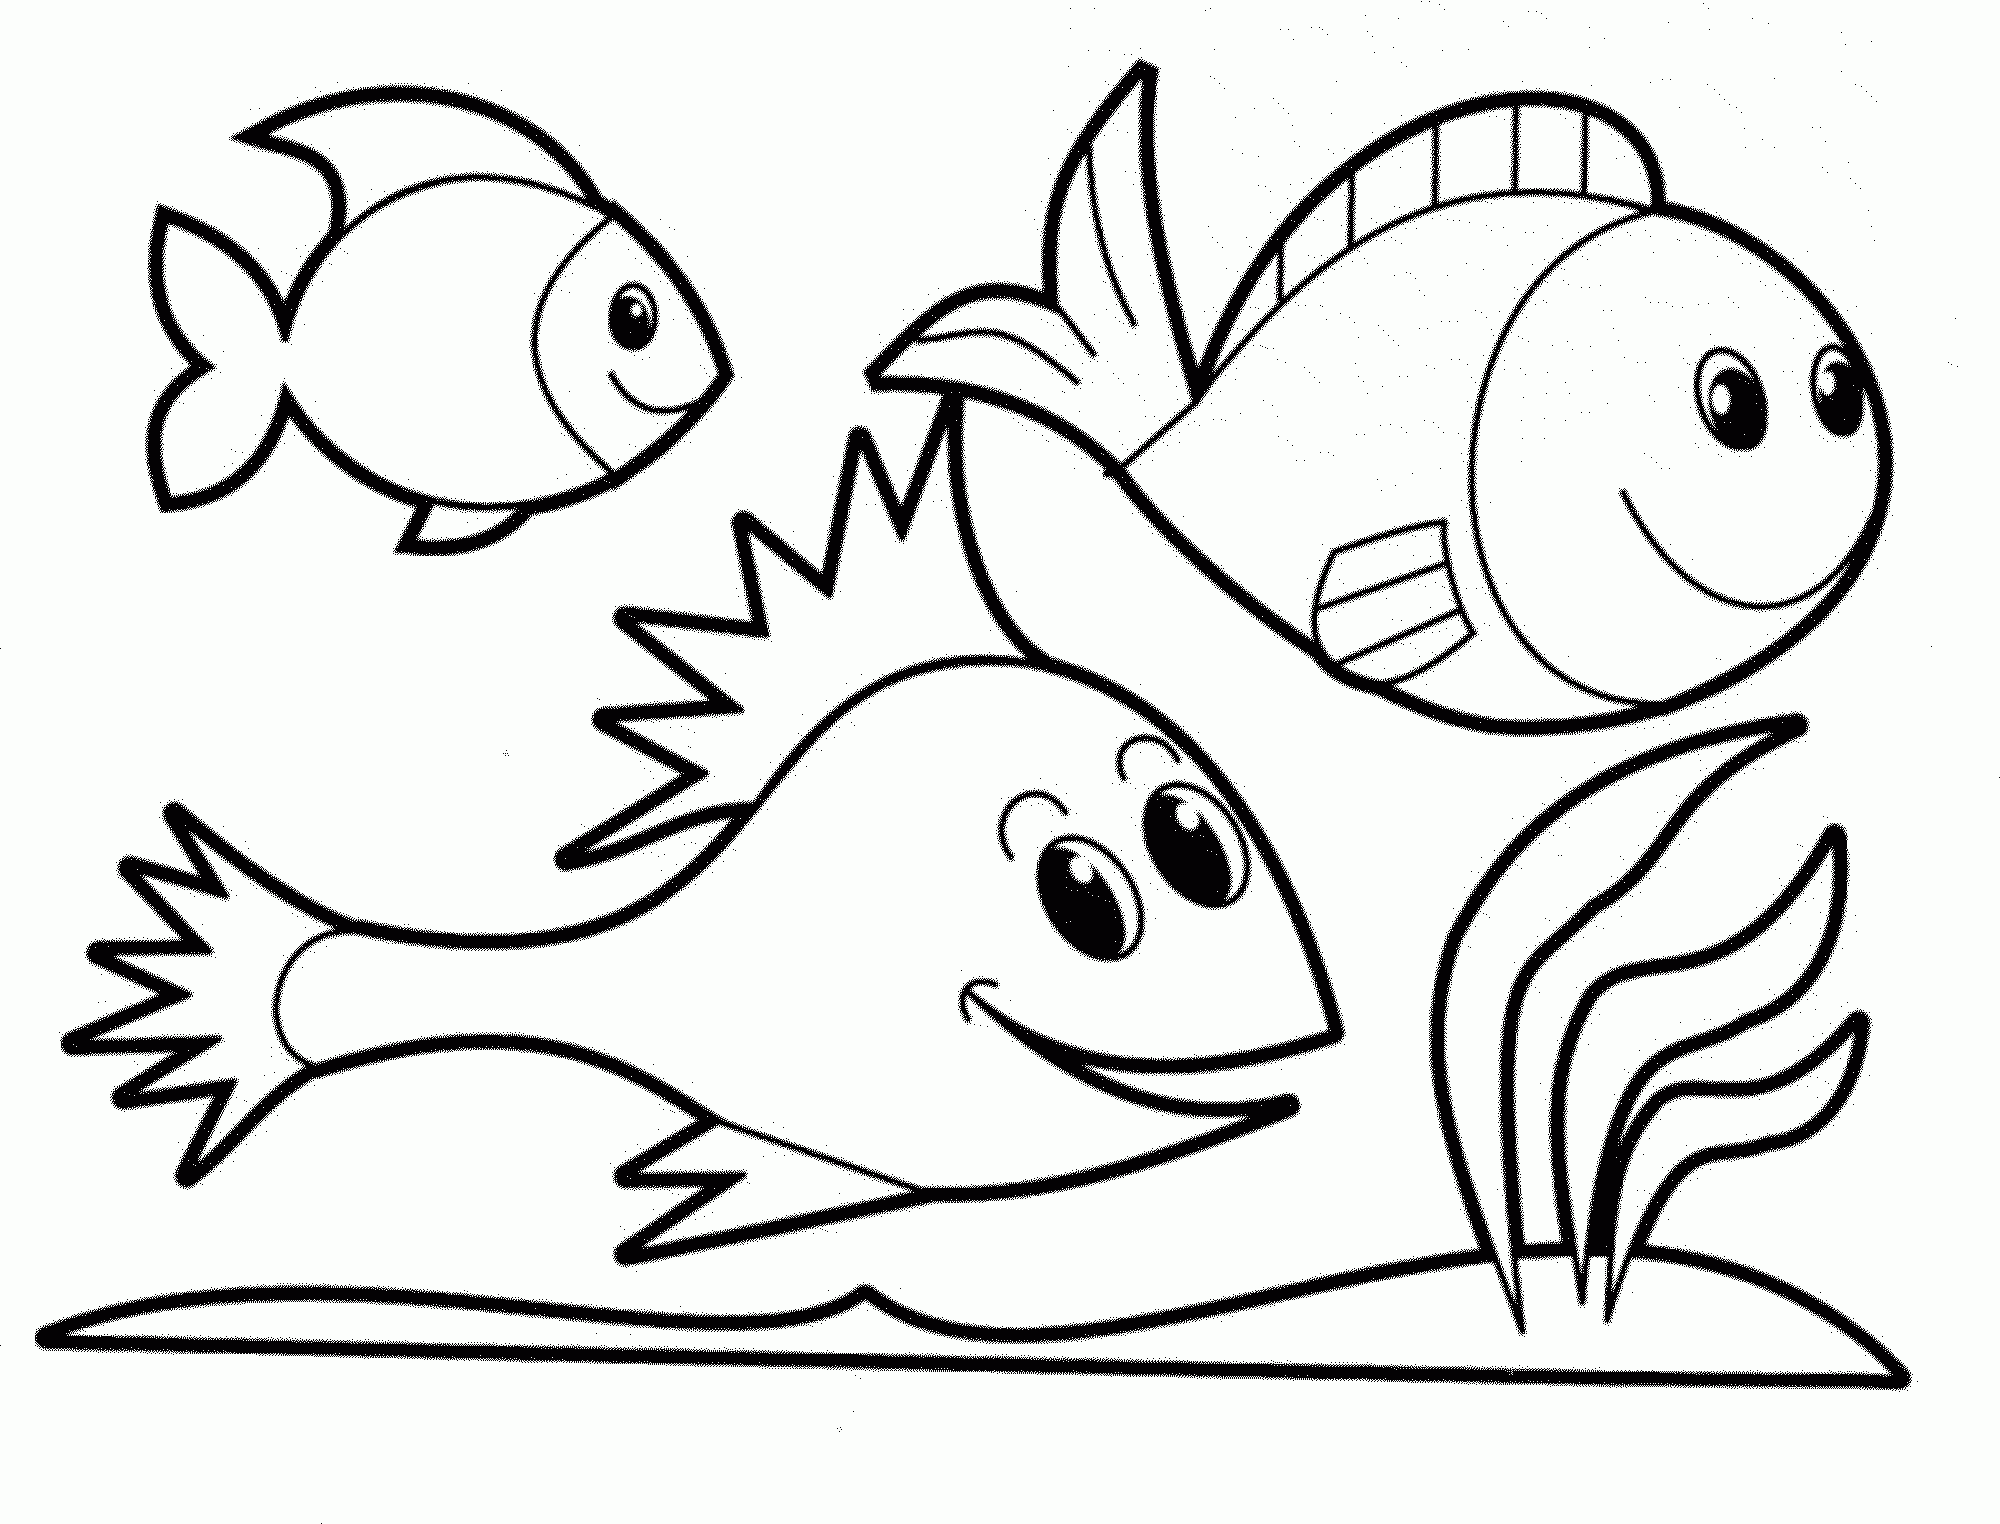 fish-coloring-pages-eretdvrlistscom-coloring-home